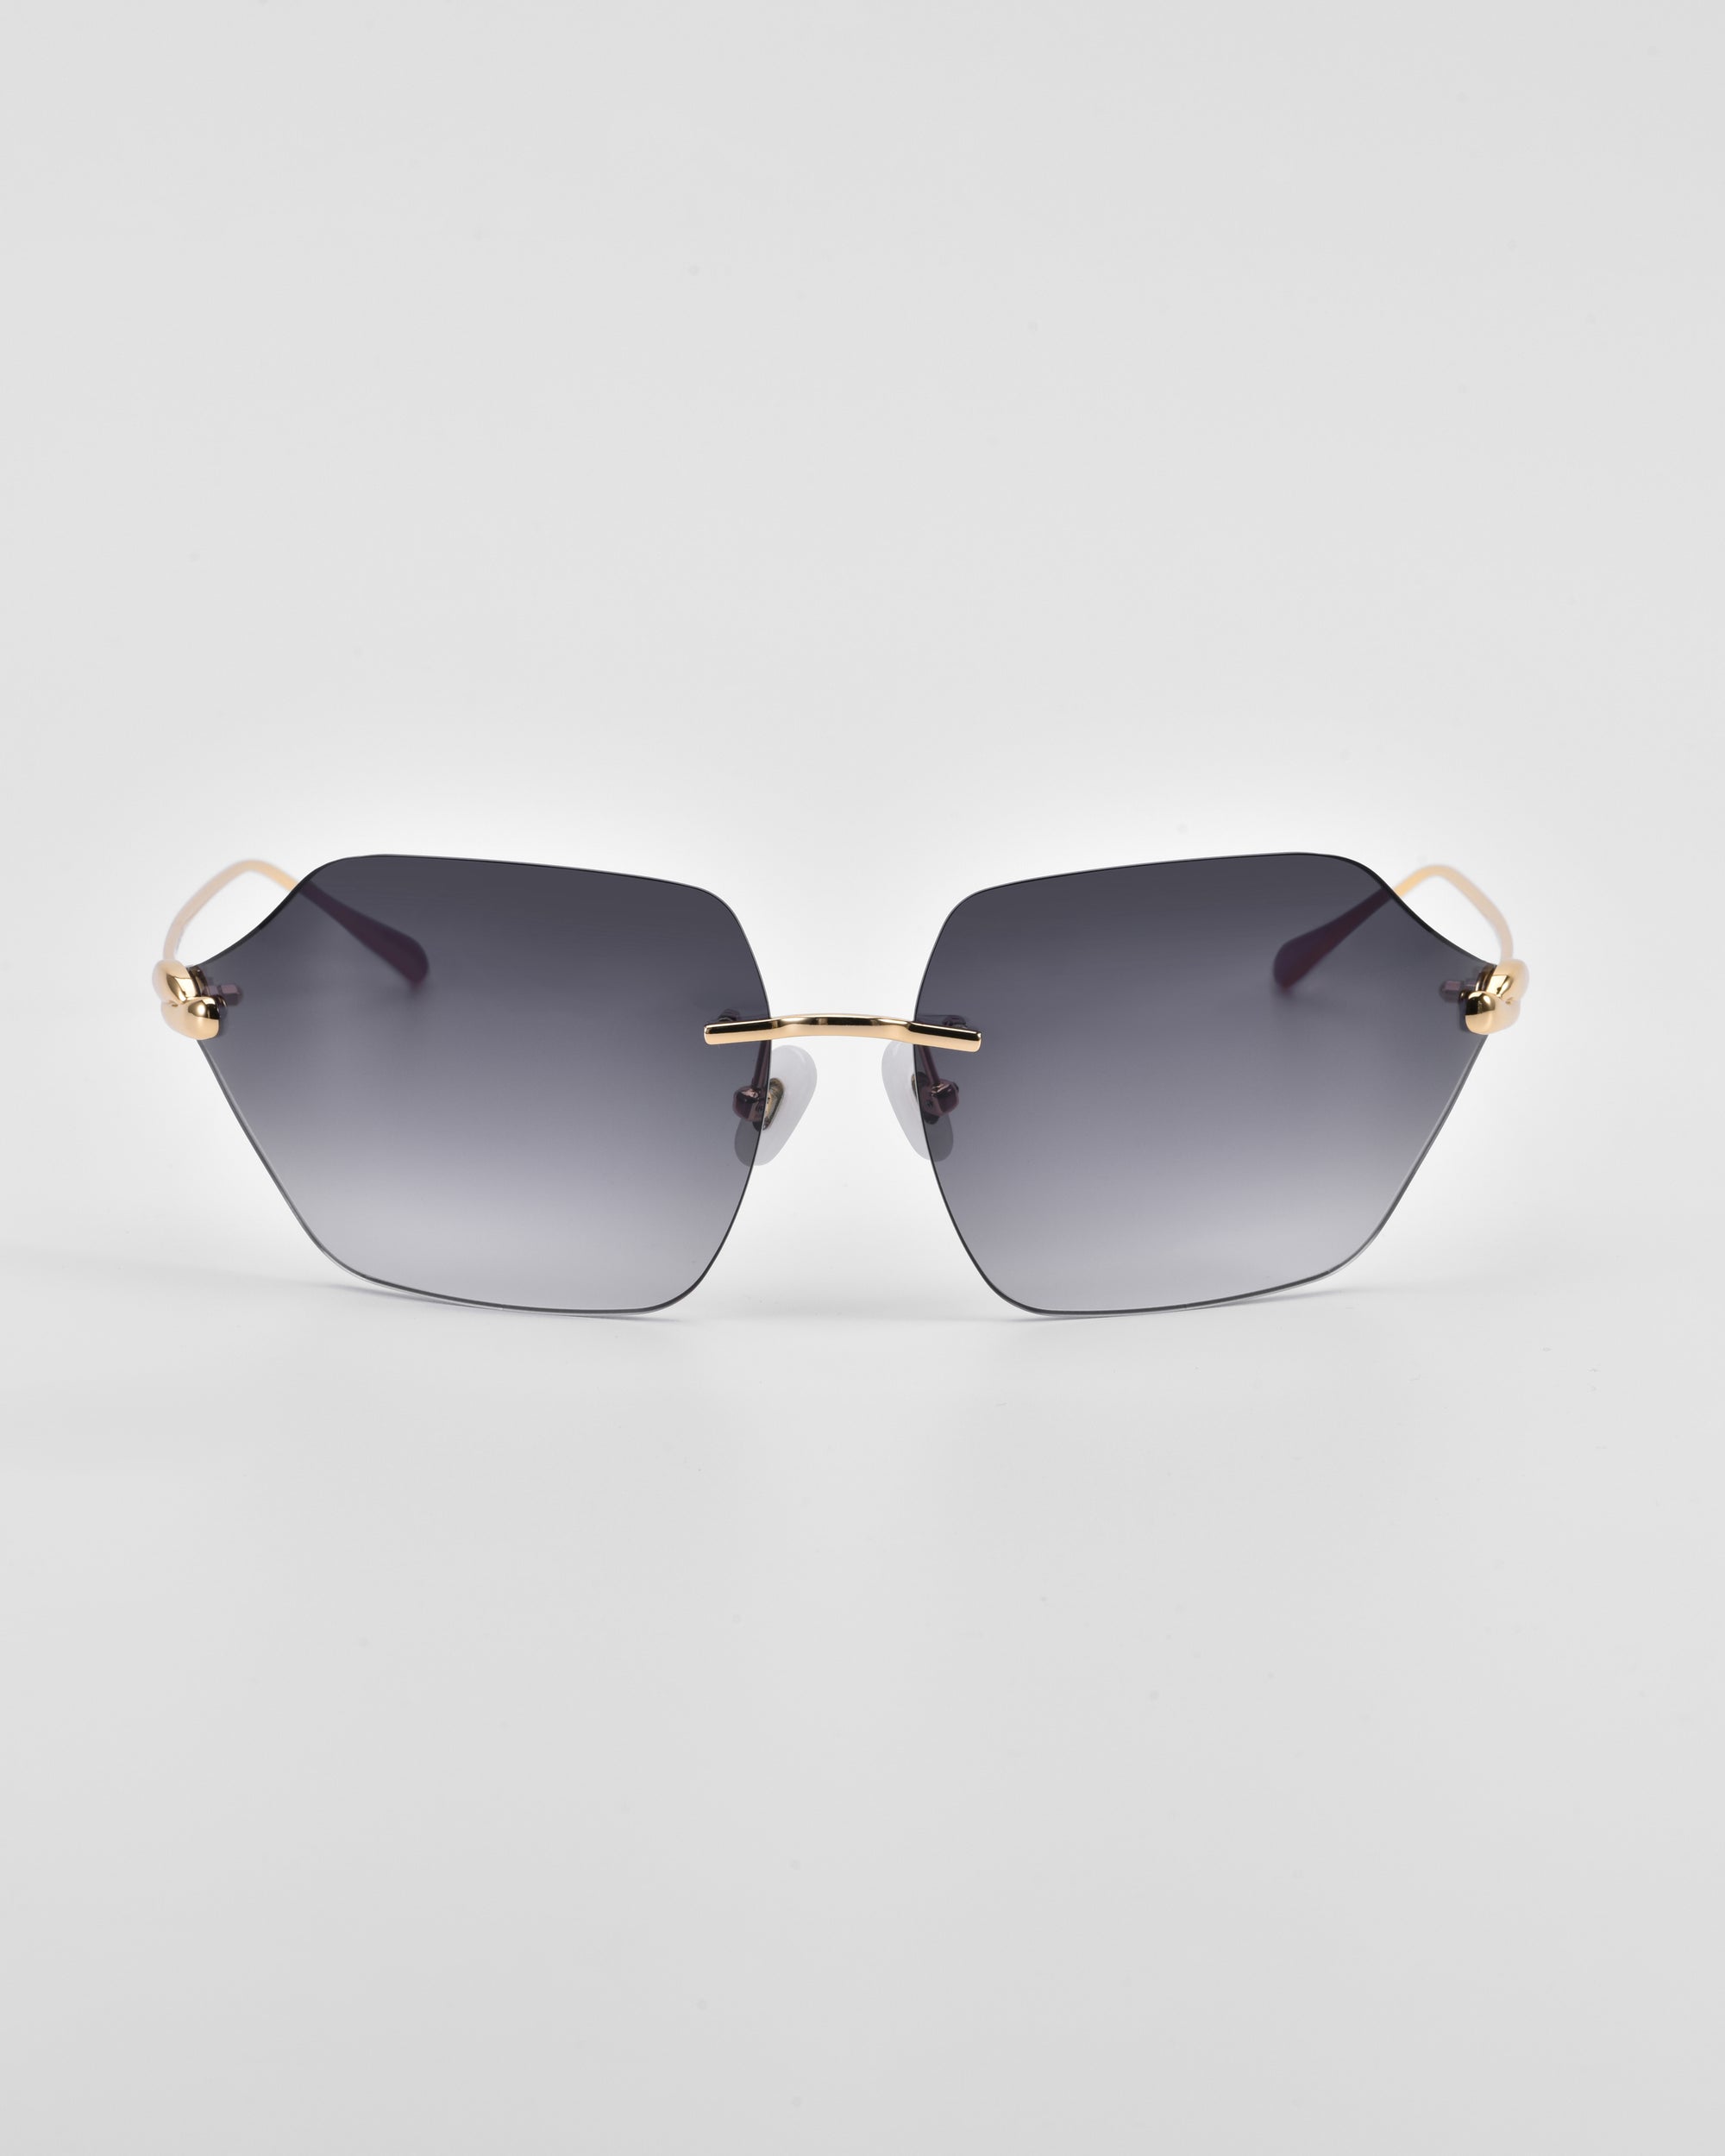 A pair of stylish For Art's Sake® Serpent II sunglasses featuring oversized, geometric hexagonal lenses with dark gray gradient tint and 18-karat gold-plated metal accents on the hinges and nose bridge, set against a plain white background.